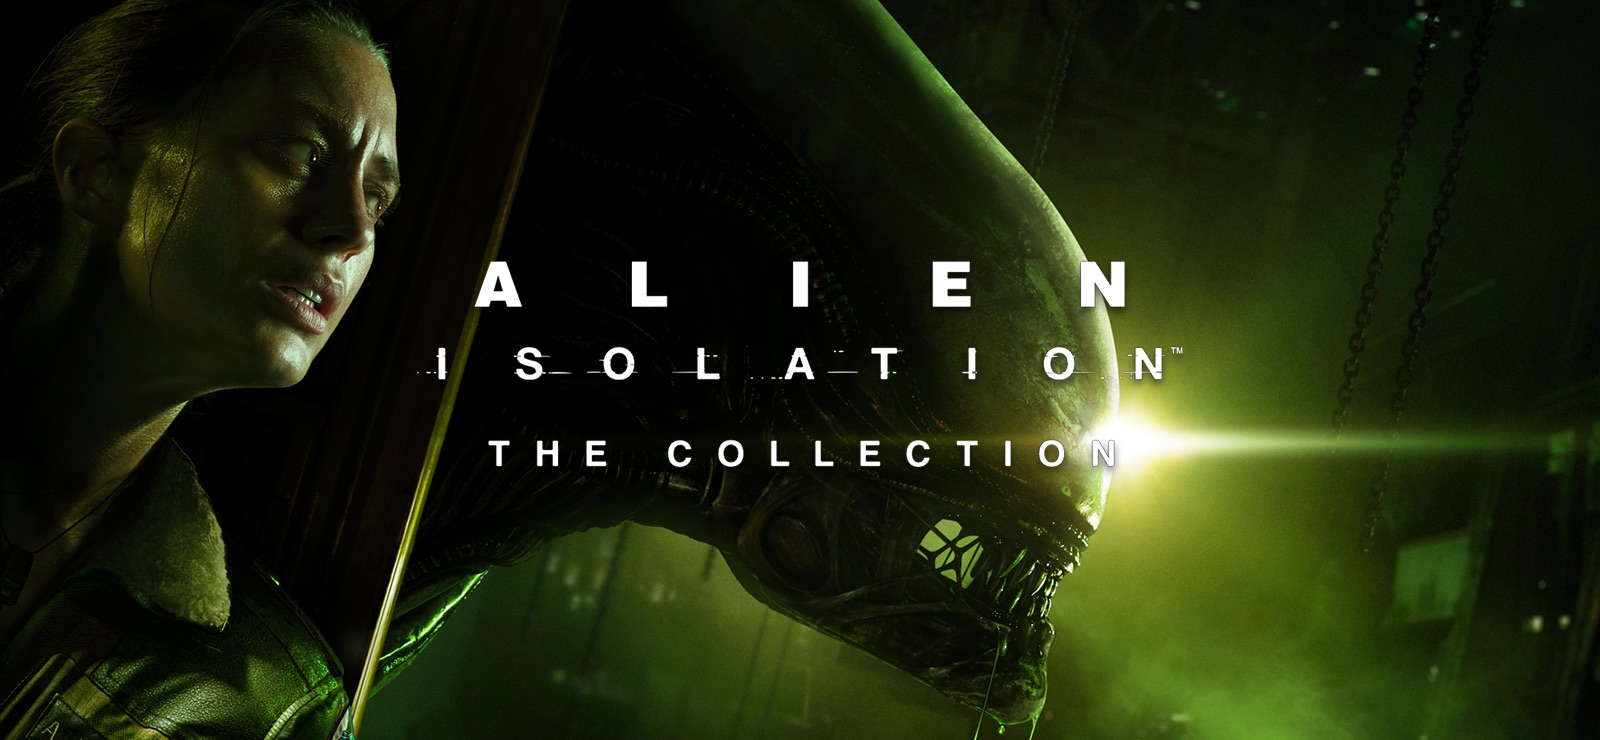 Alien:isolation collection 80%off with code YACV3D43D2940260E4